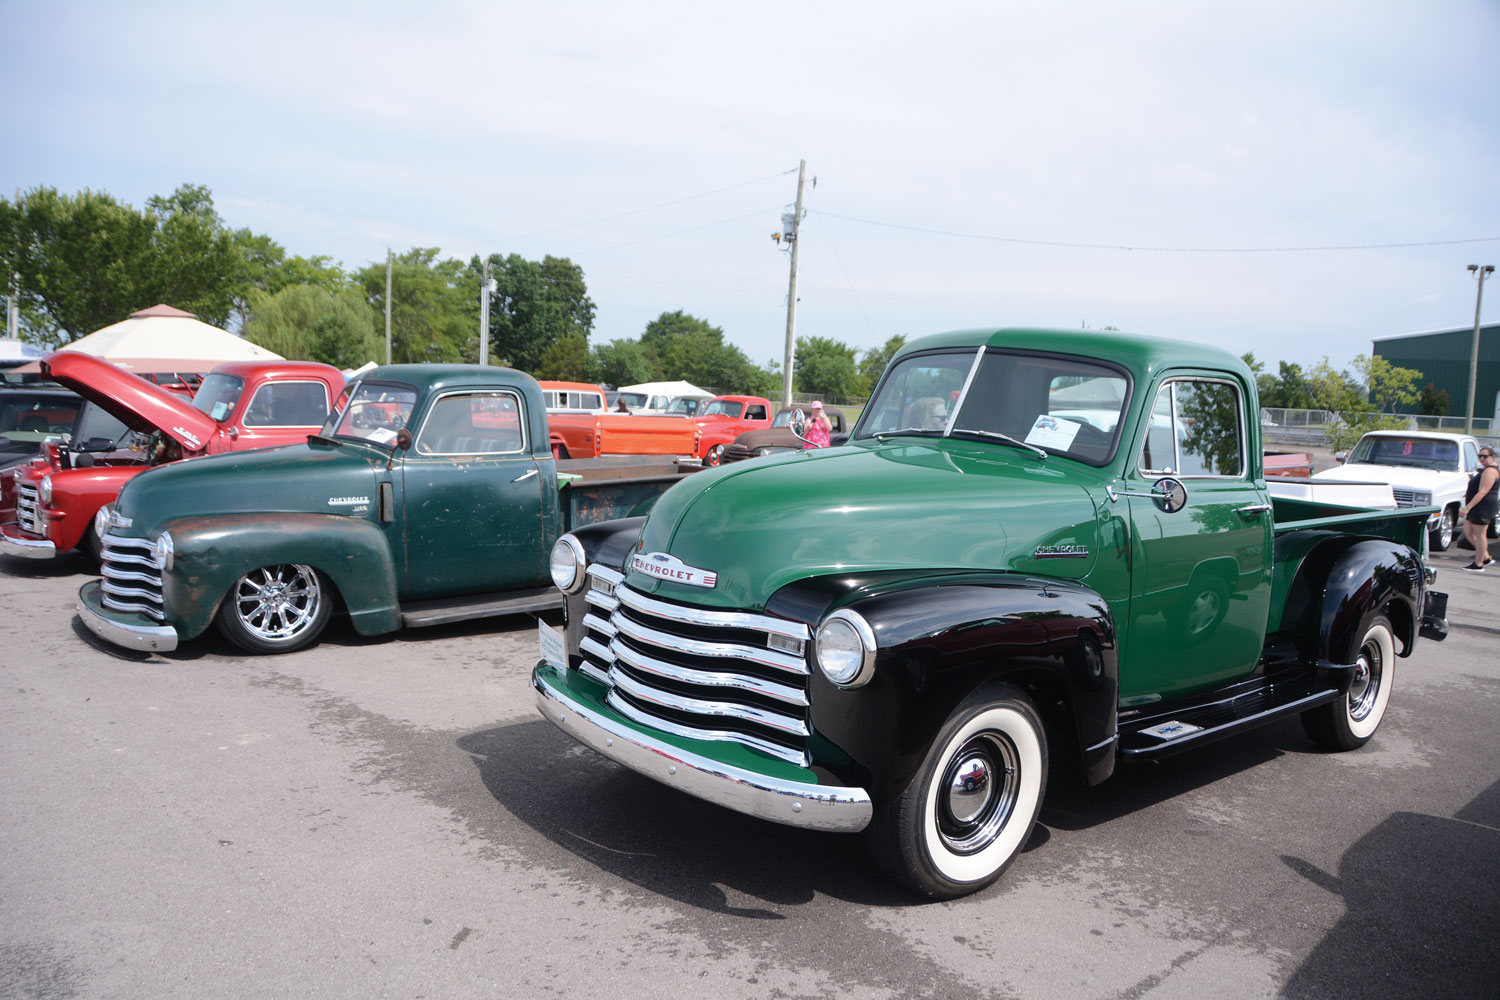 A variety of Chevy's and GMC's lined up